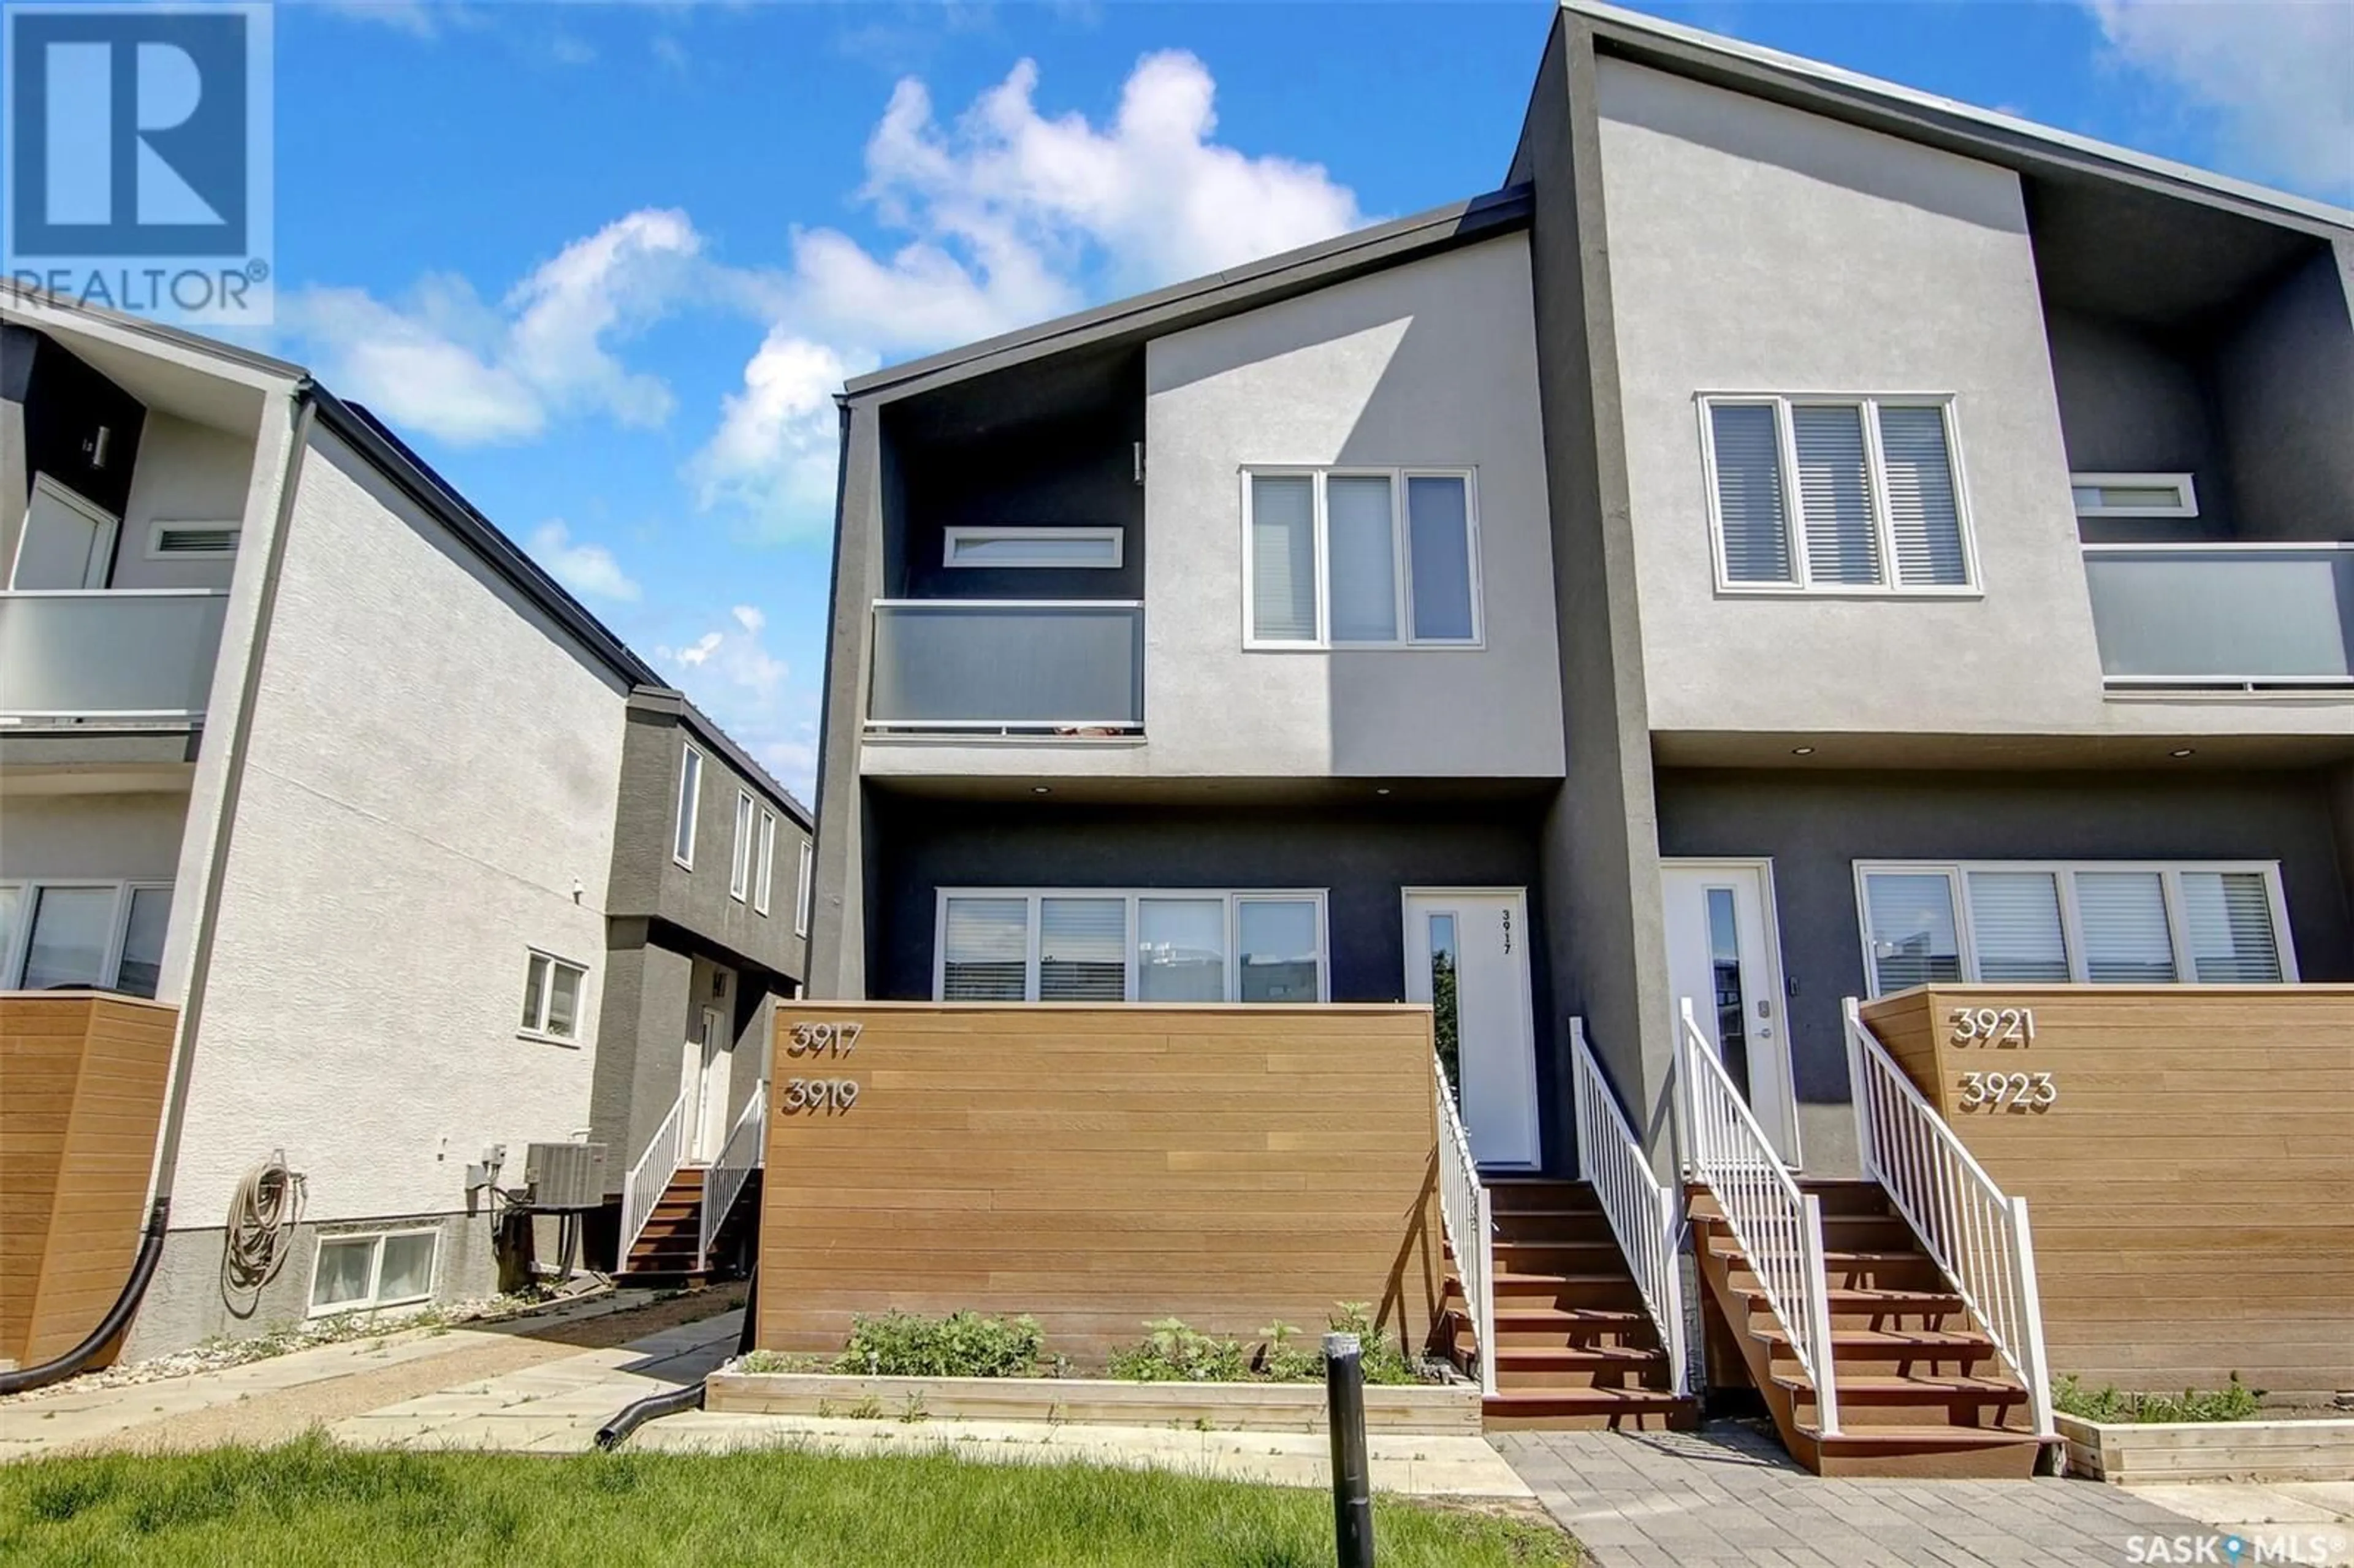 A pic from exterior of the house or condo for 3919 James Hill ROAD, Regina Saskatchewan S4W0N8